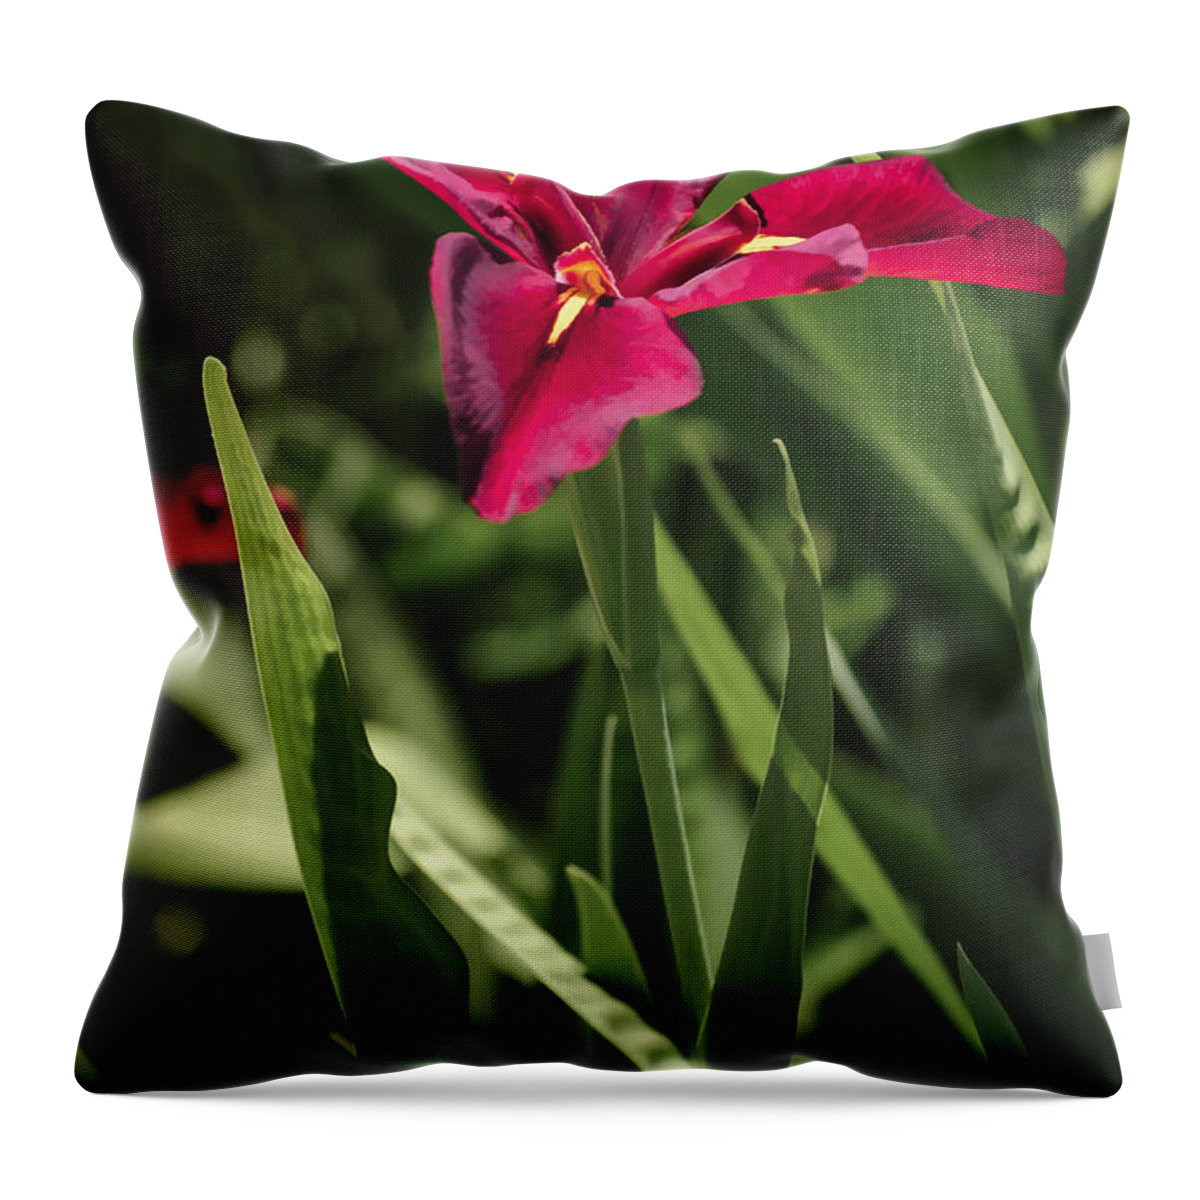 Flowers Throw Pillow featuring the photograph Red Louisiana Iris by Penny Lisowski